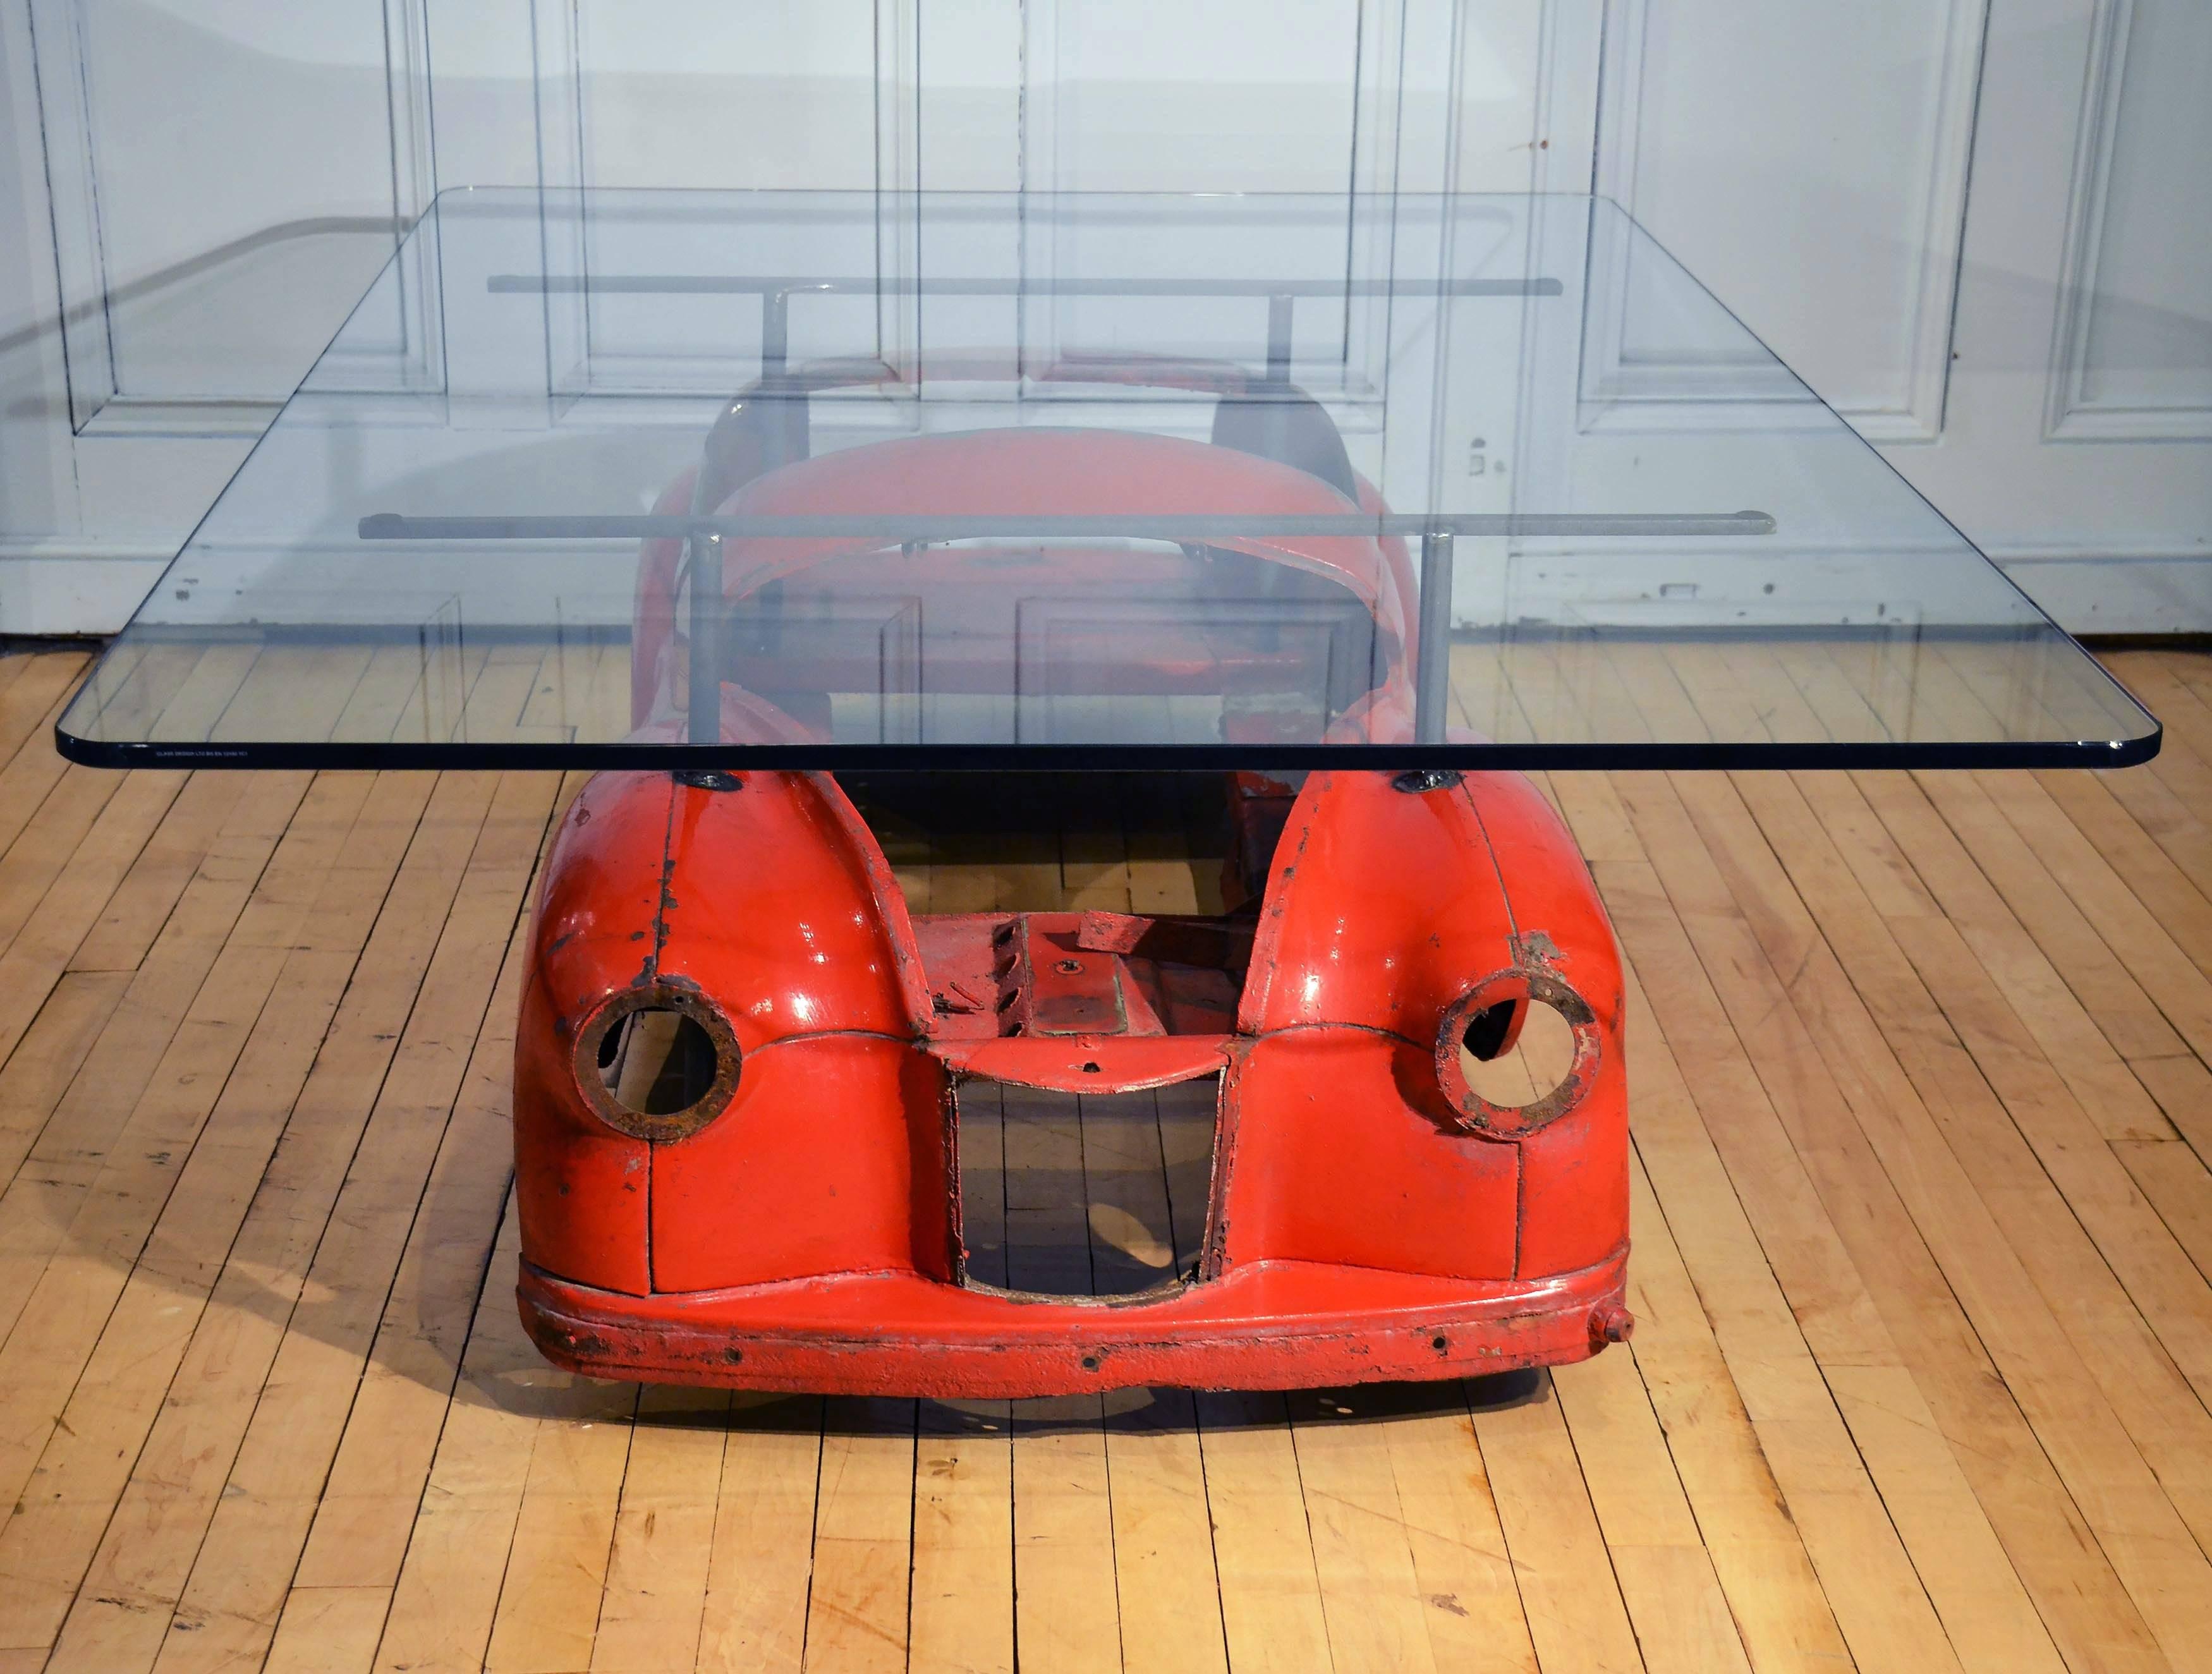 This fantastic industrial coffee table is individually designed and created with a distressed 1950s Red Austin J40 toy car mounted underneath a substantial glass top that measures 115 ml in thickness. The top is rectangular in shape with rounded